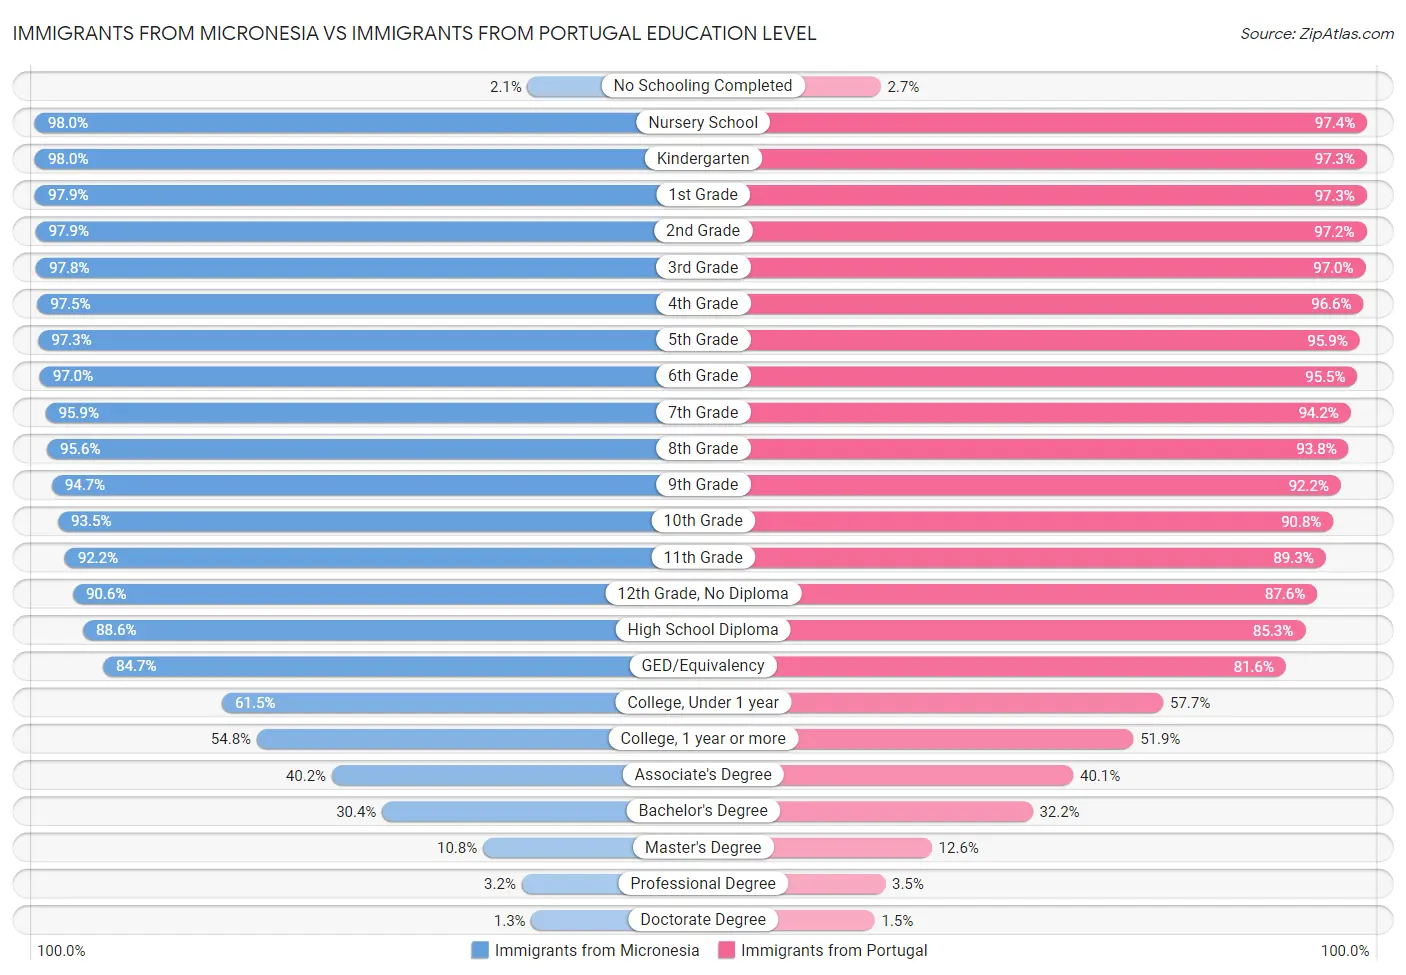 Immigrants from Micronesia vs Immigrants from Portugal Education Level